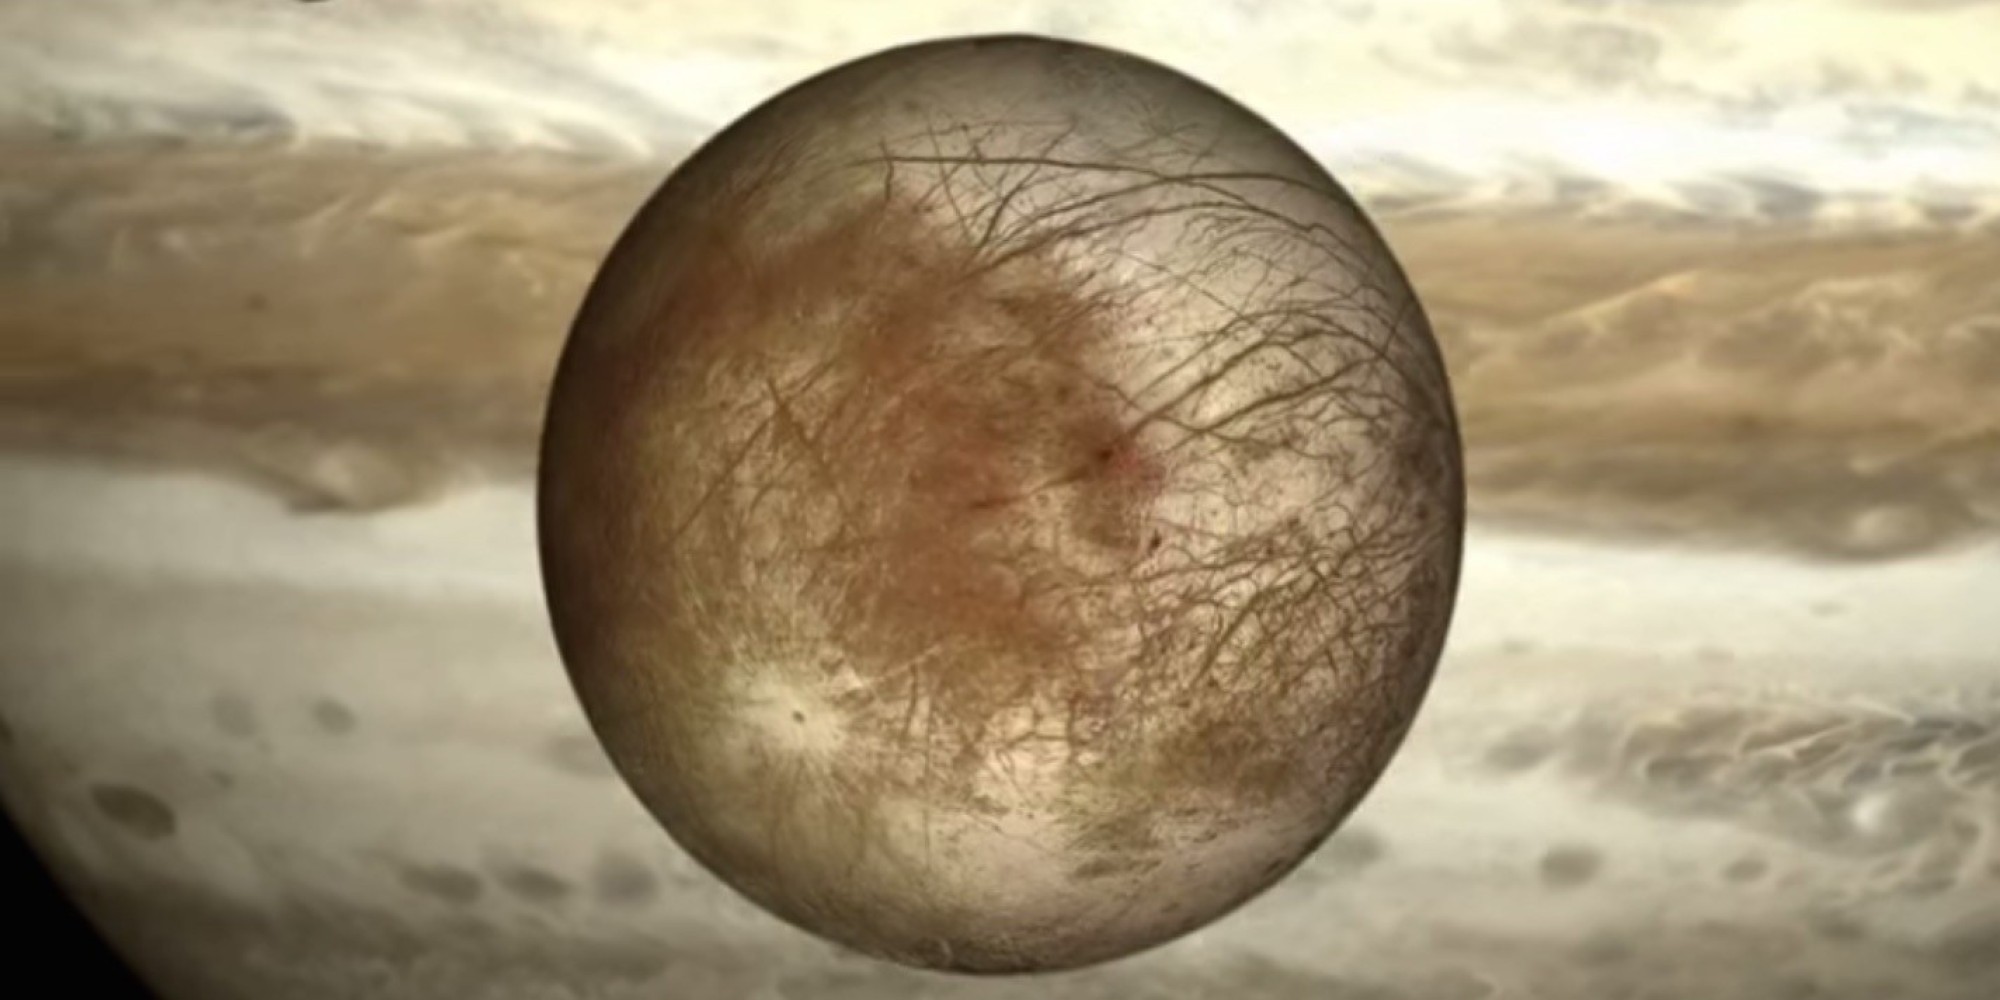 NASA Preps Mission To Search For Life On Europa, One Of Jupiter's Moons